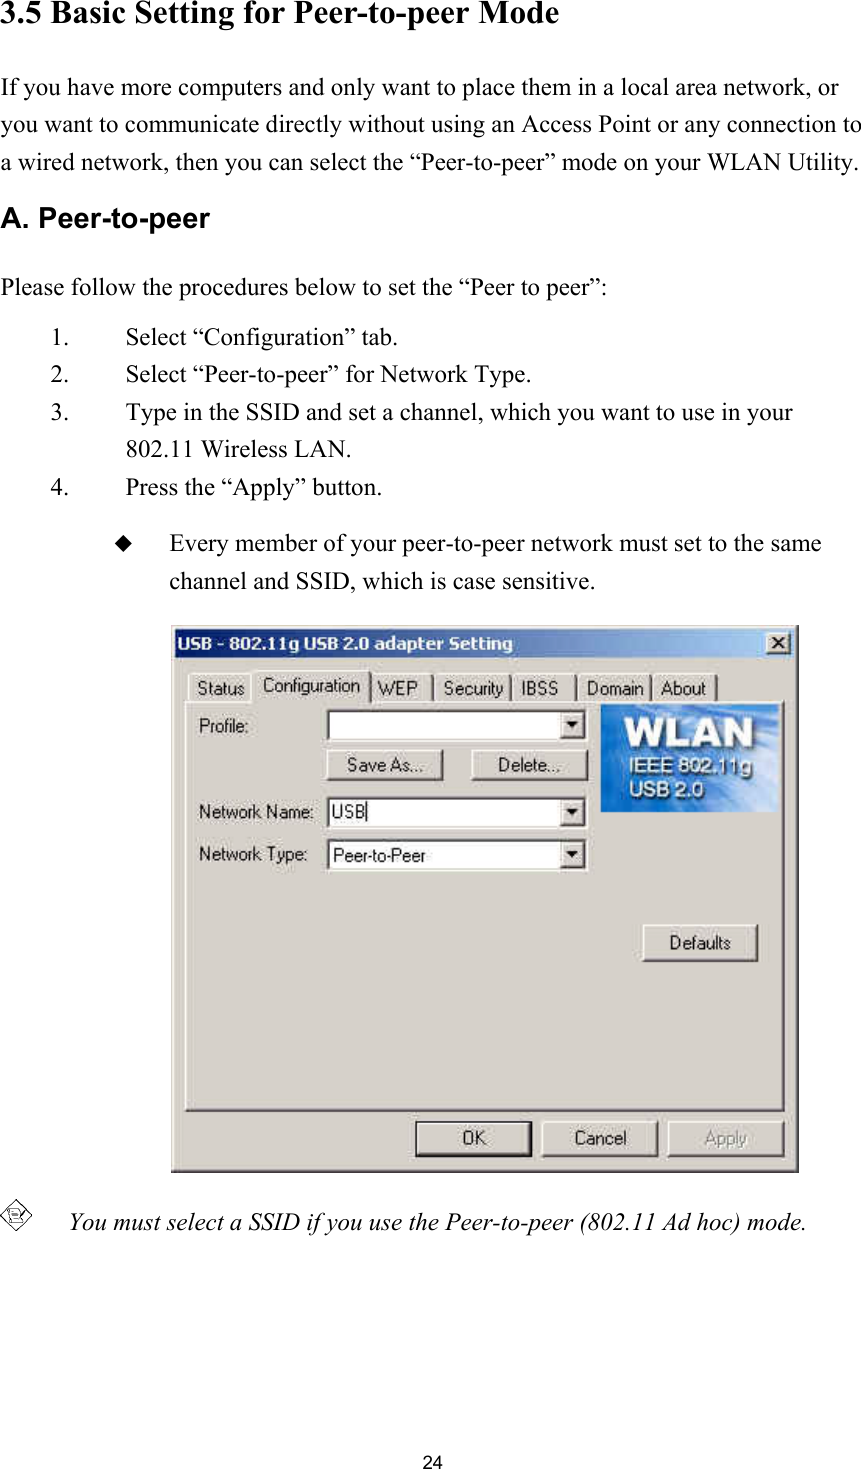 243.5 Basic Setting for Peer-to-peer ModeIf you have more computers and only want to place them in a local area network, oryou want to communicate directly without using an Access Point or any connection toa wired network, then you can select the “Peer-to-peer” mode on your WLAN Utility.A. Peer-to-peerPlease follow the procedures below to set the “Peer to peer”:1. Select “Configuration” tab.2. Select “Peer-to-peer” for Network Type.3. Type in the SSID and set a channel, which you want to use in your802.11 Wireless LAN.4. Press the “Apply” button. Every member of your peer-to-peer network must set to the samechannel and SSID, which is case sensitive.   You must select a SSID if you use the Peer-to-peer (802.11 Ad hoc) mode.